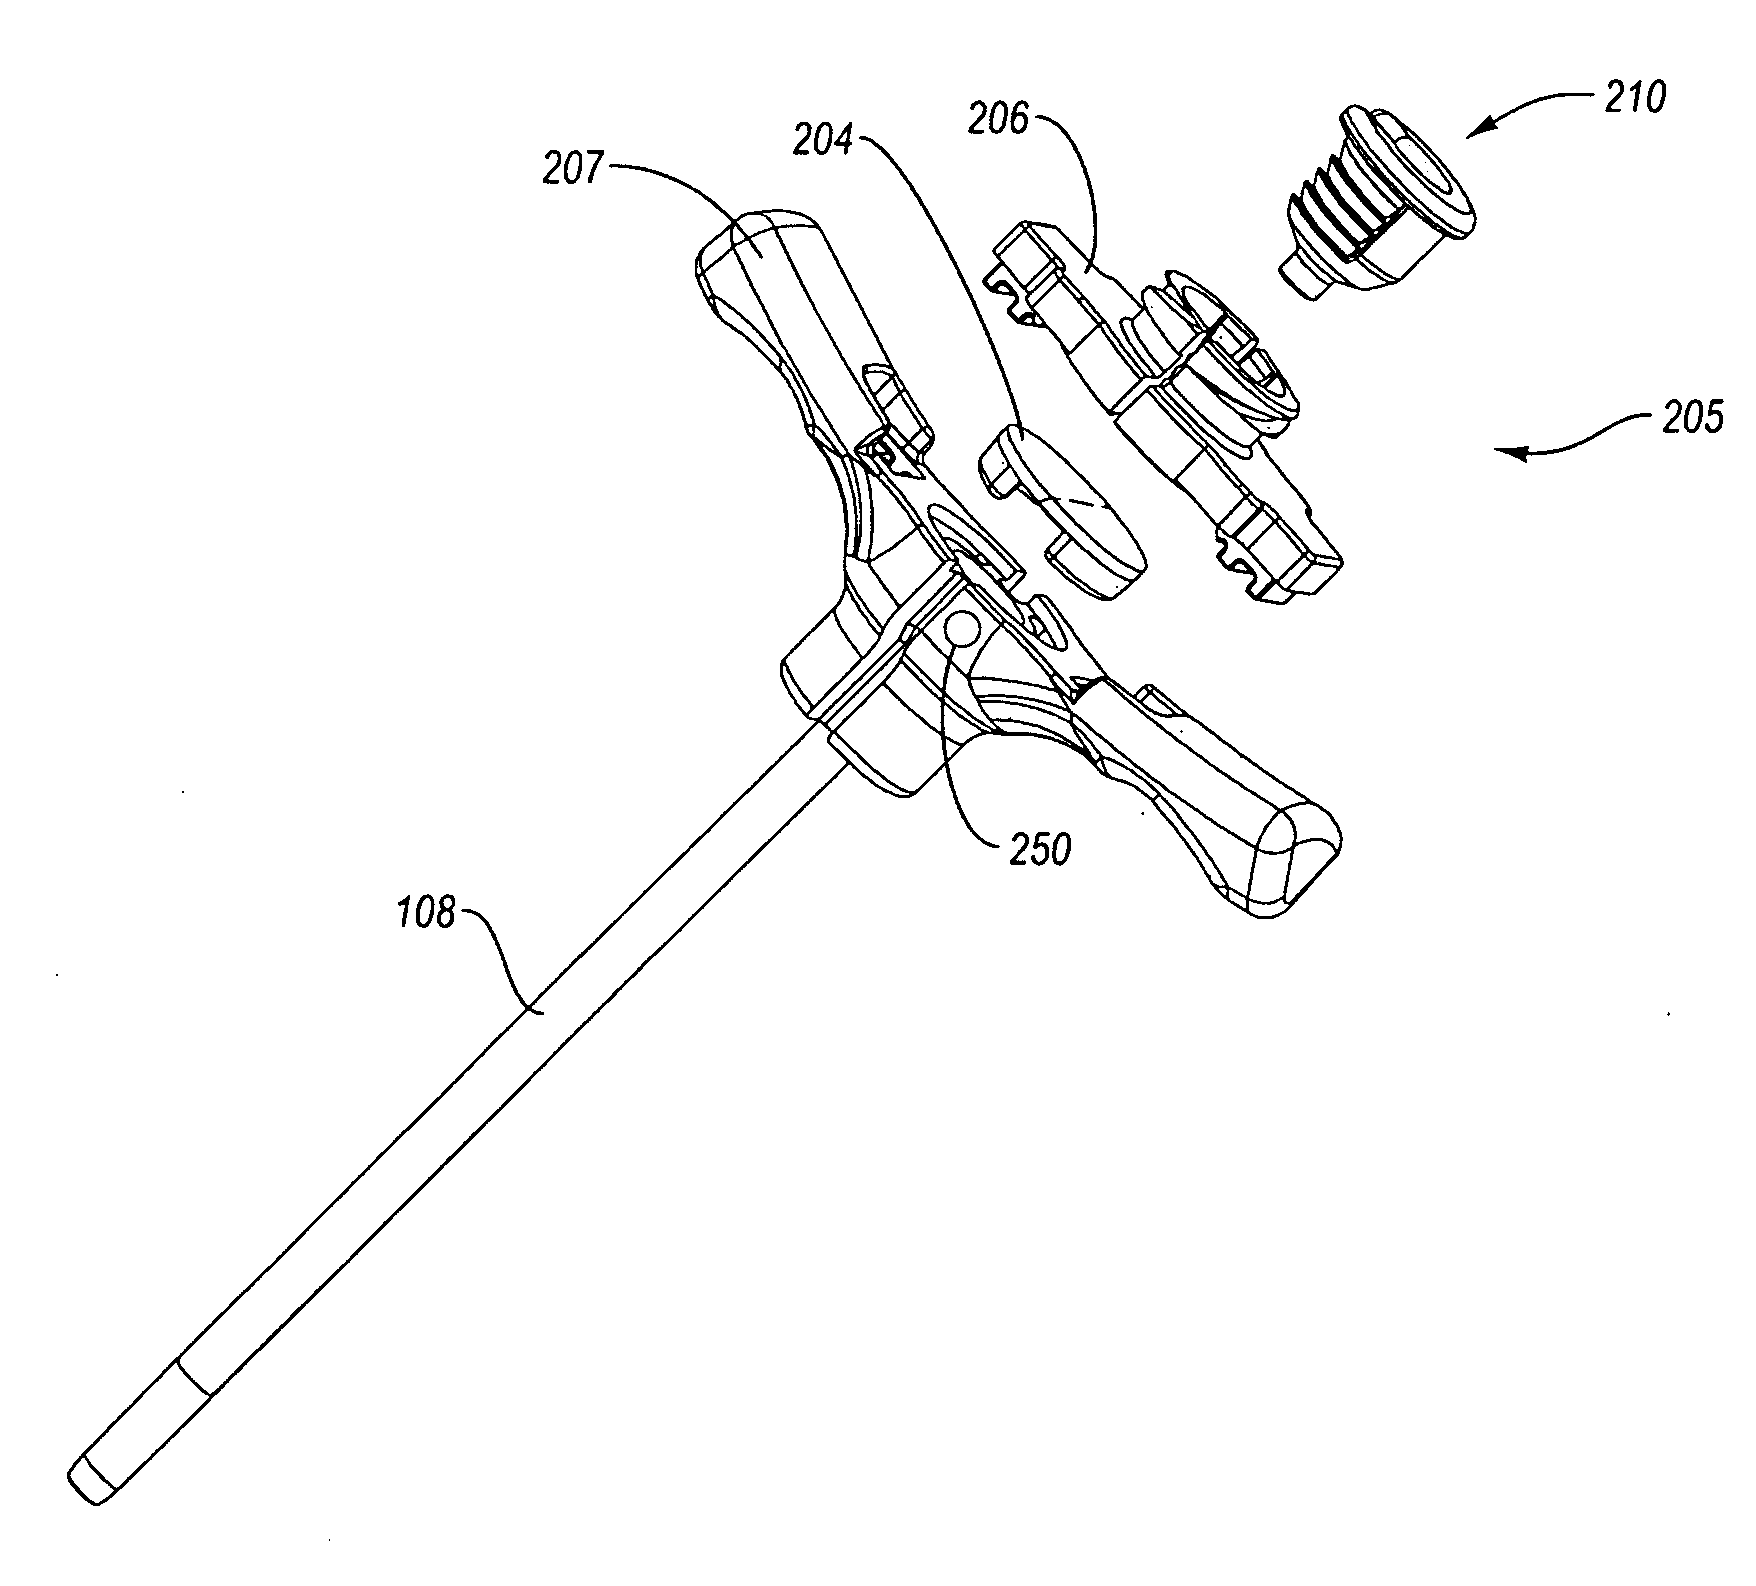 Reduced friction catheter introducer and method of manufacturing and using the same